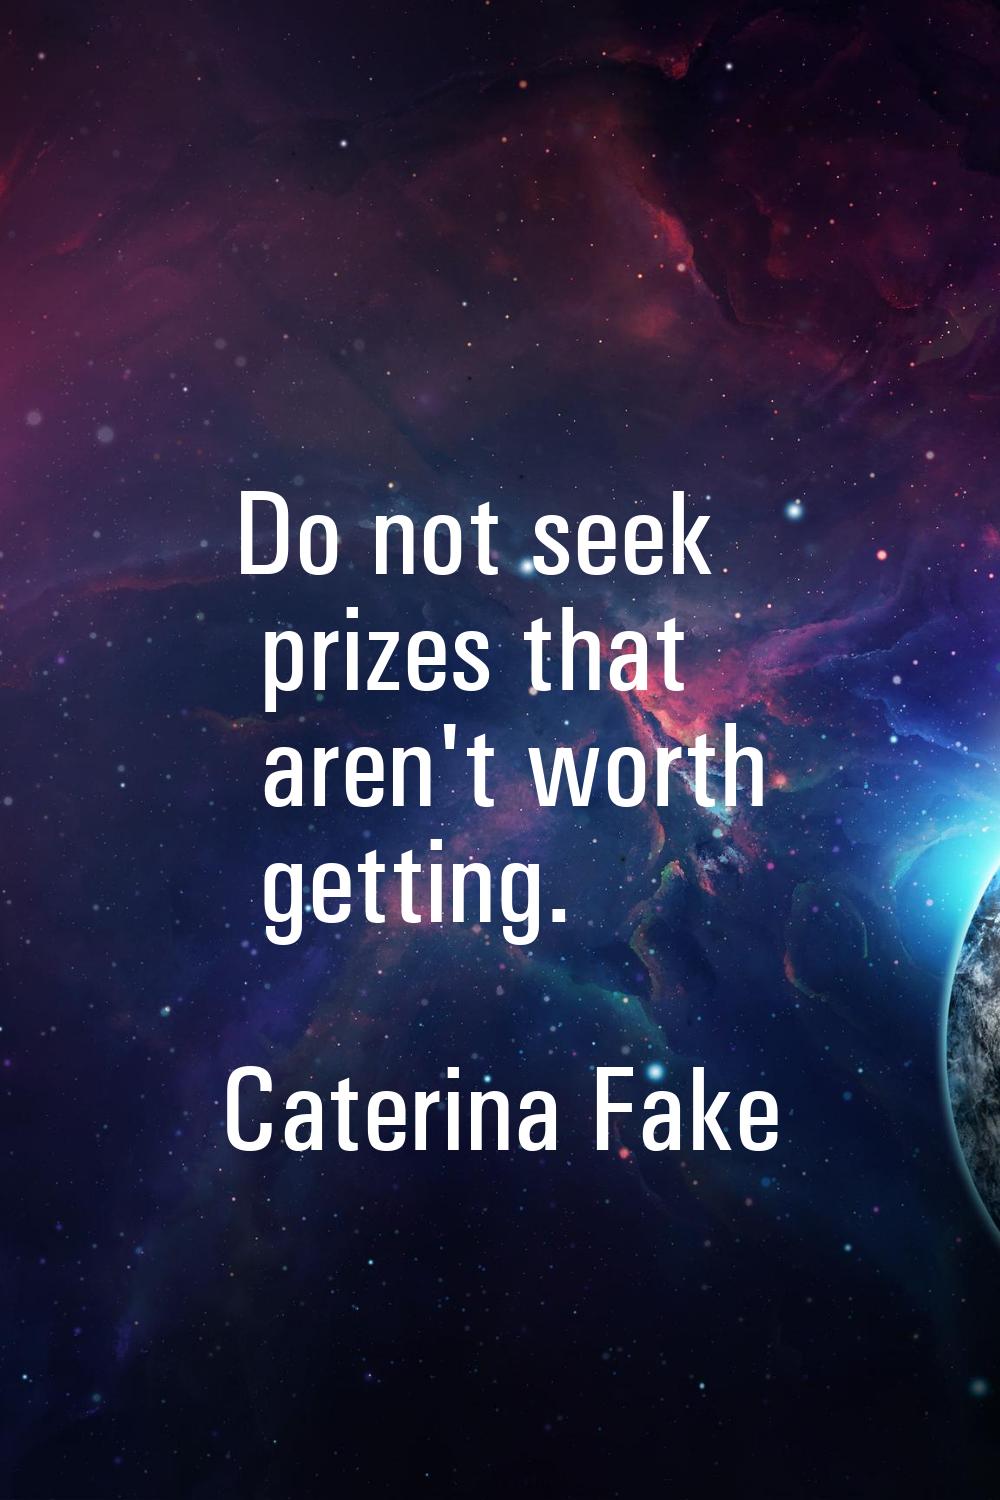 Do not seek prizes that aren't worth getting.